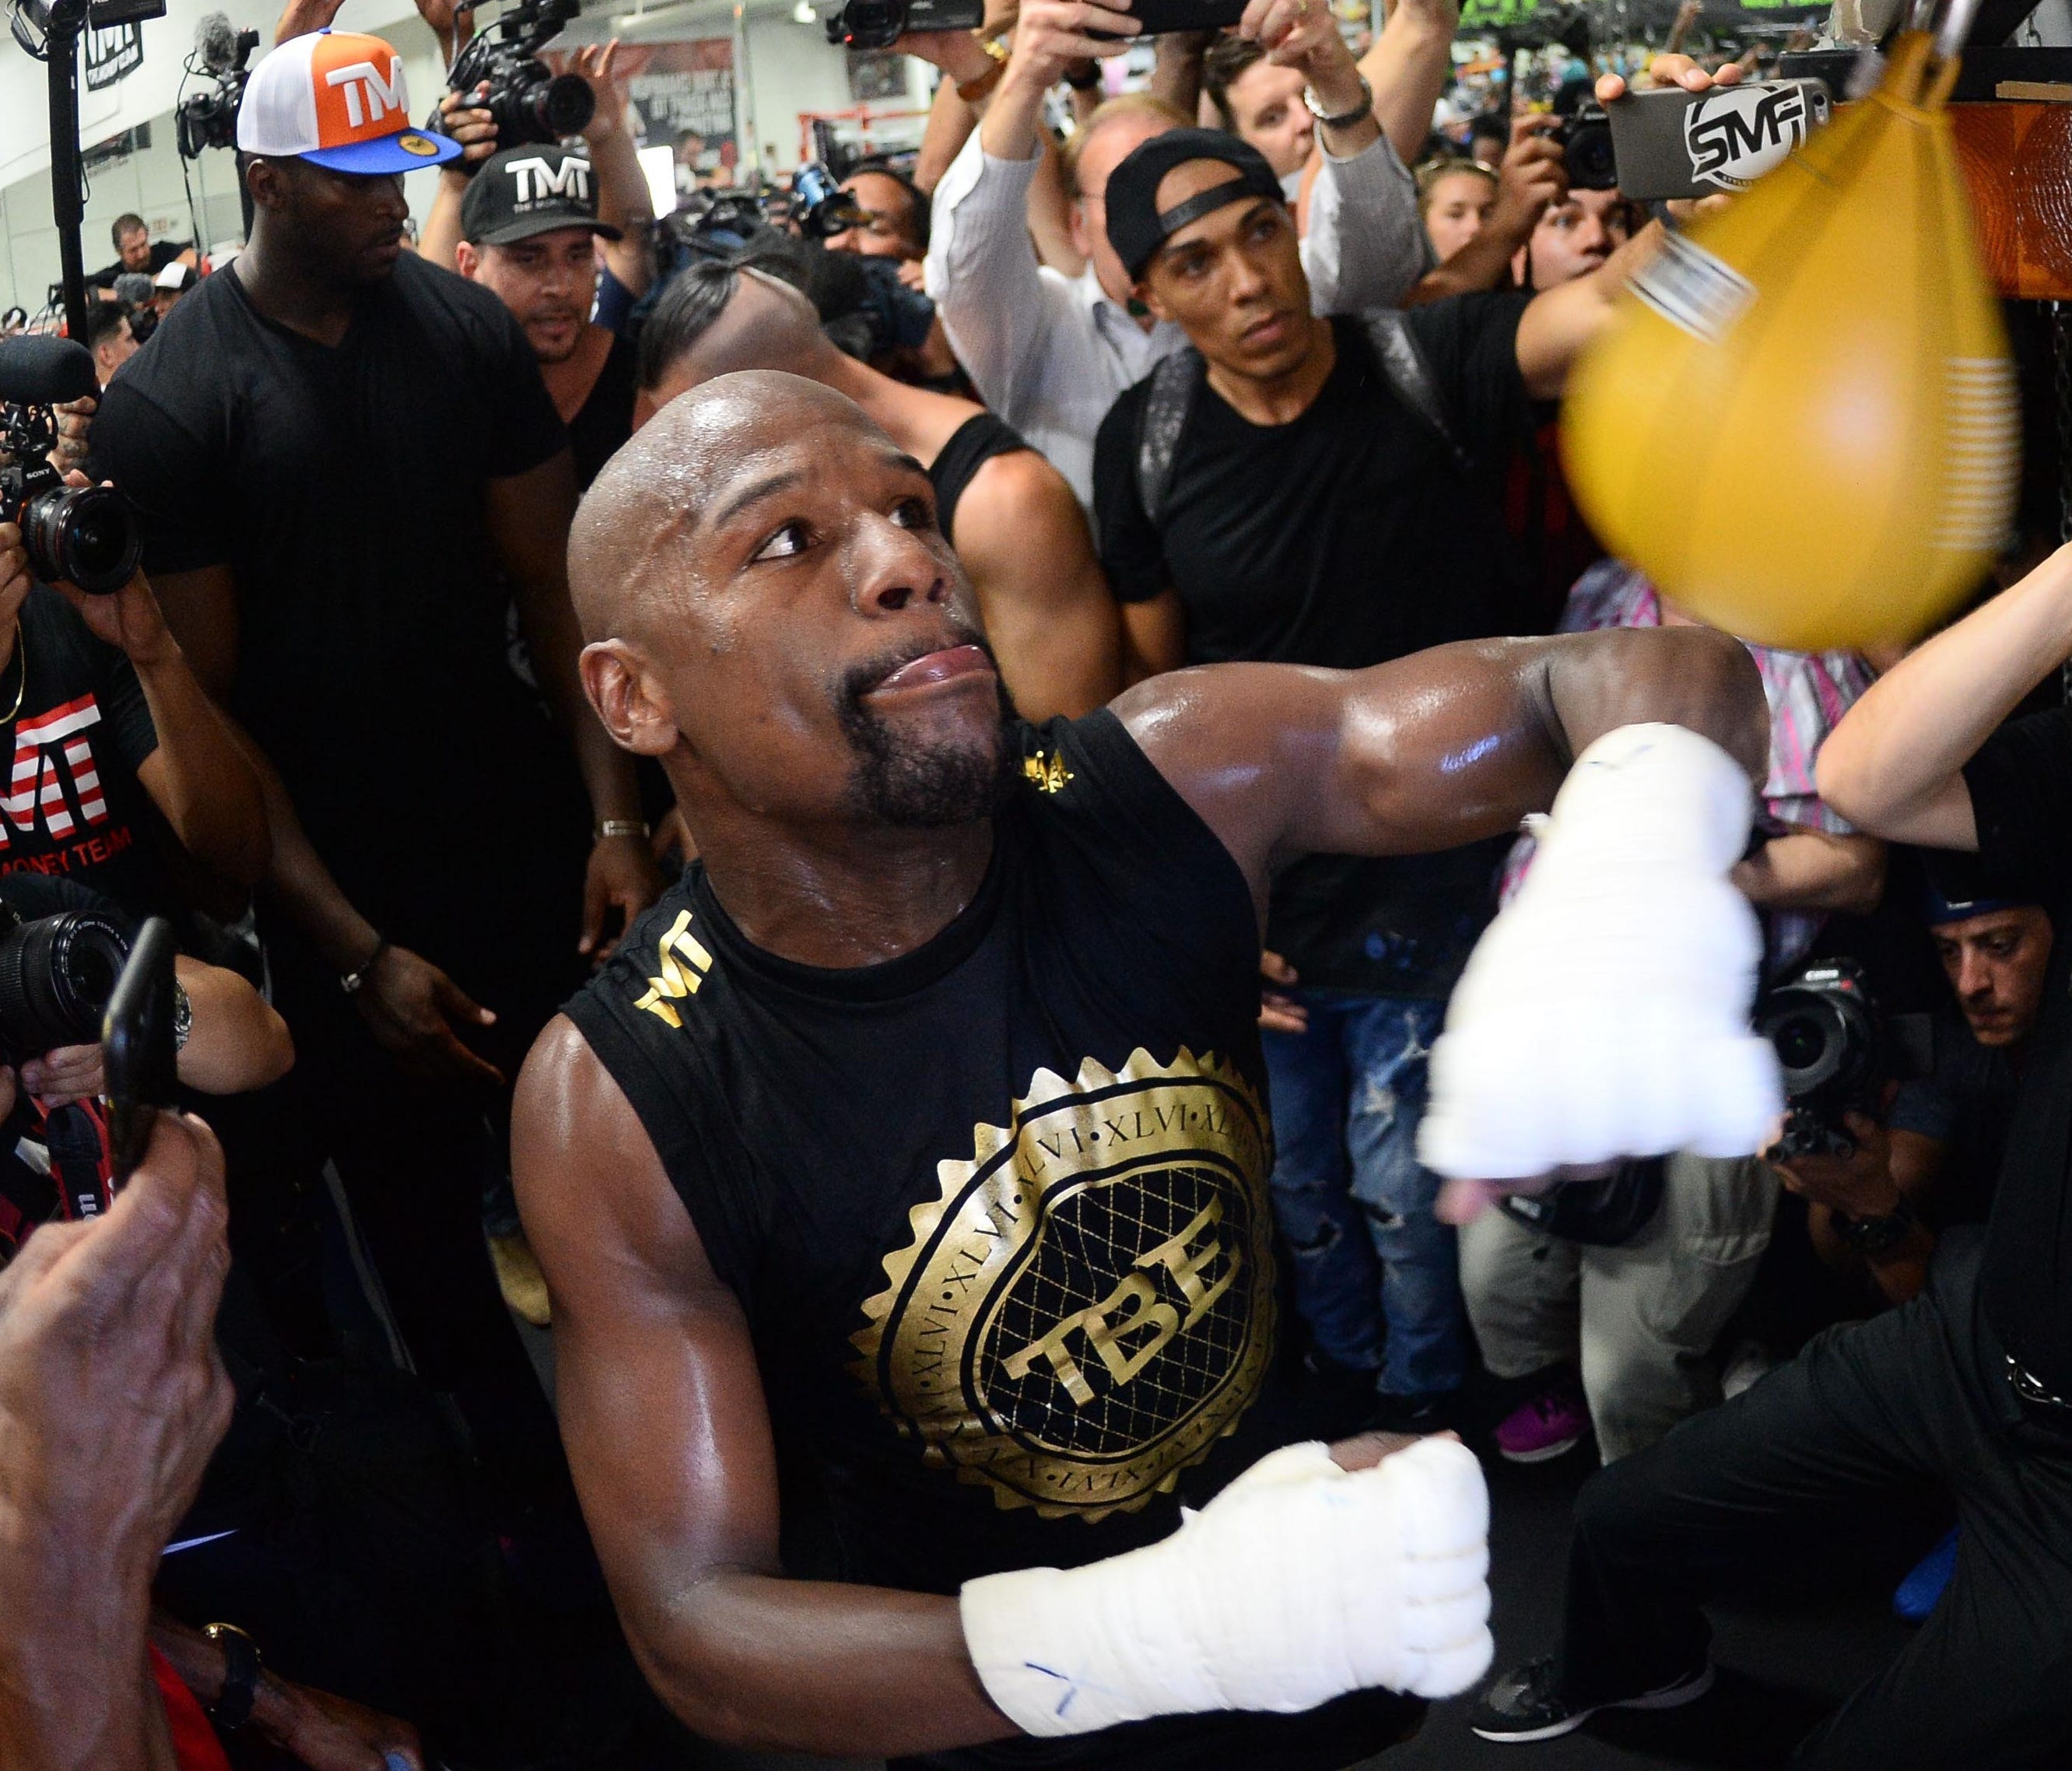 Floyd Mayweather could reportedly bet as much as $5 million on himself.